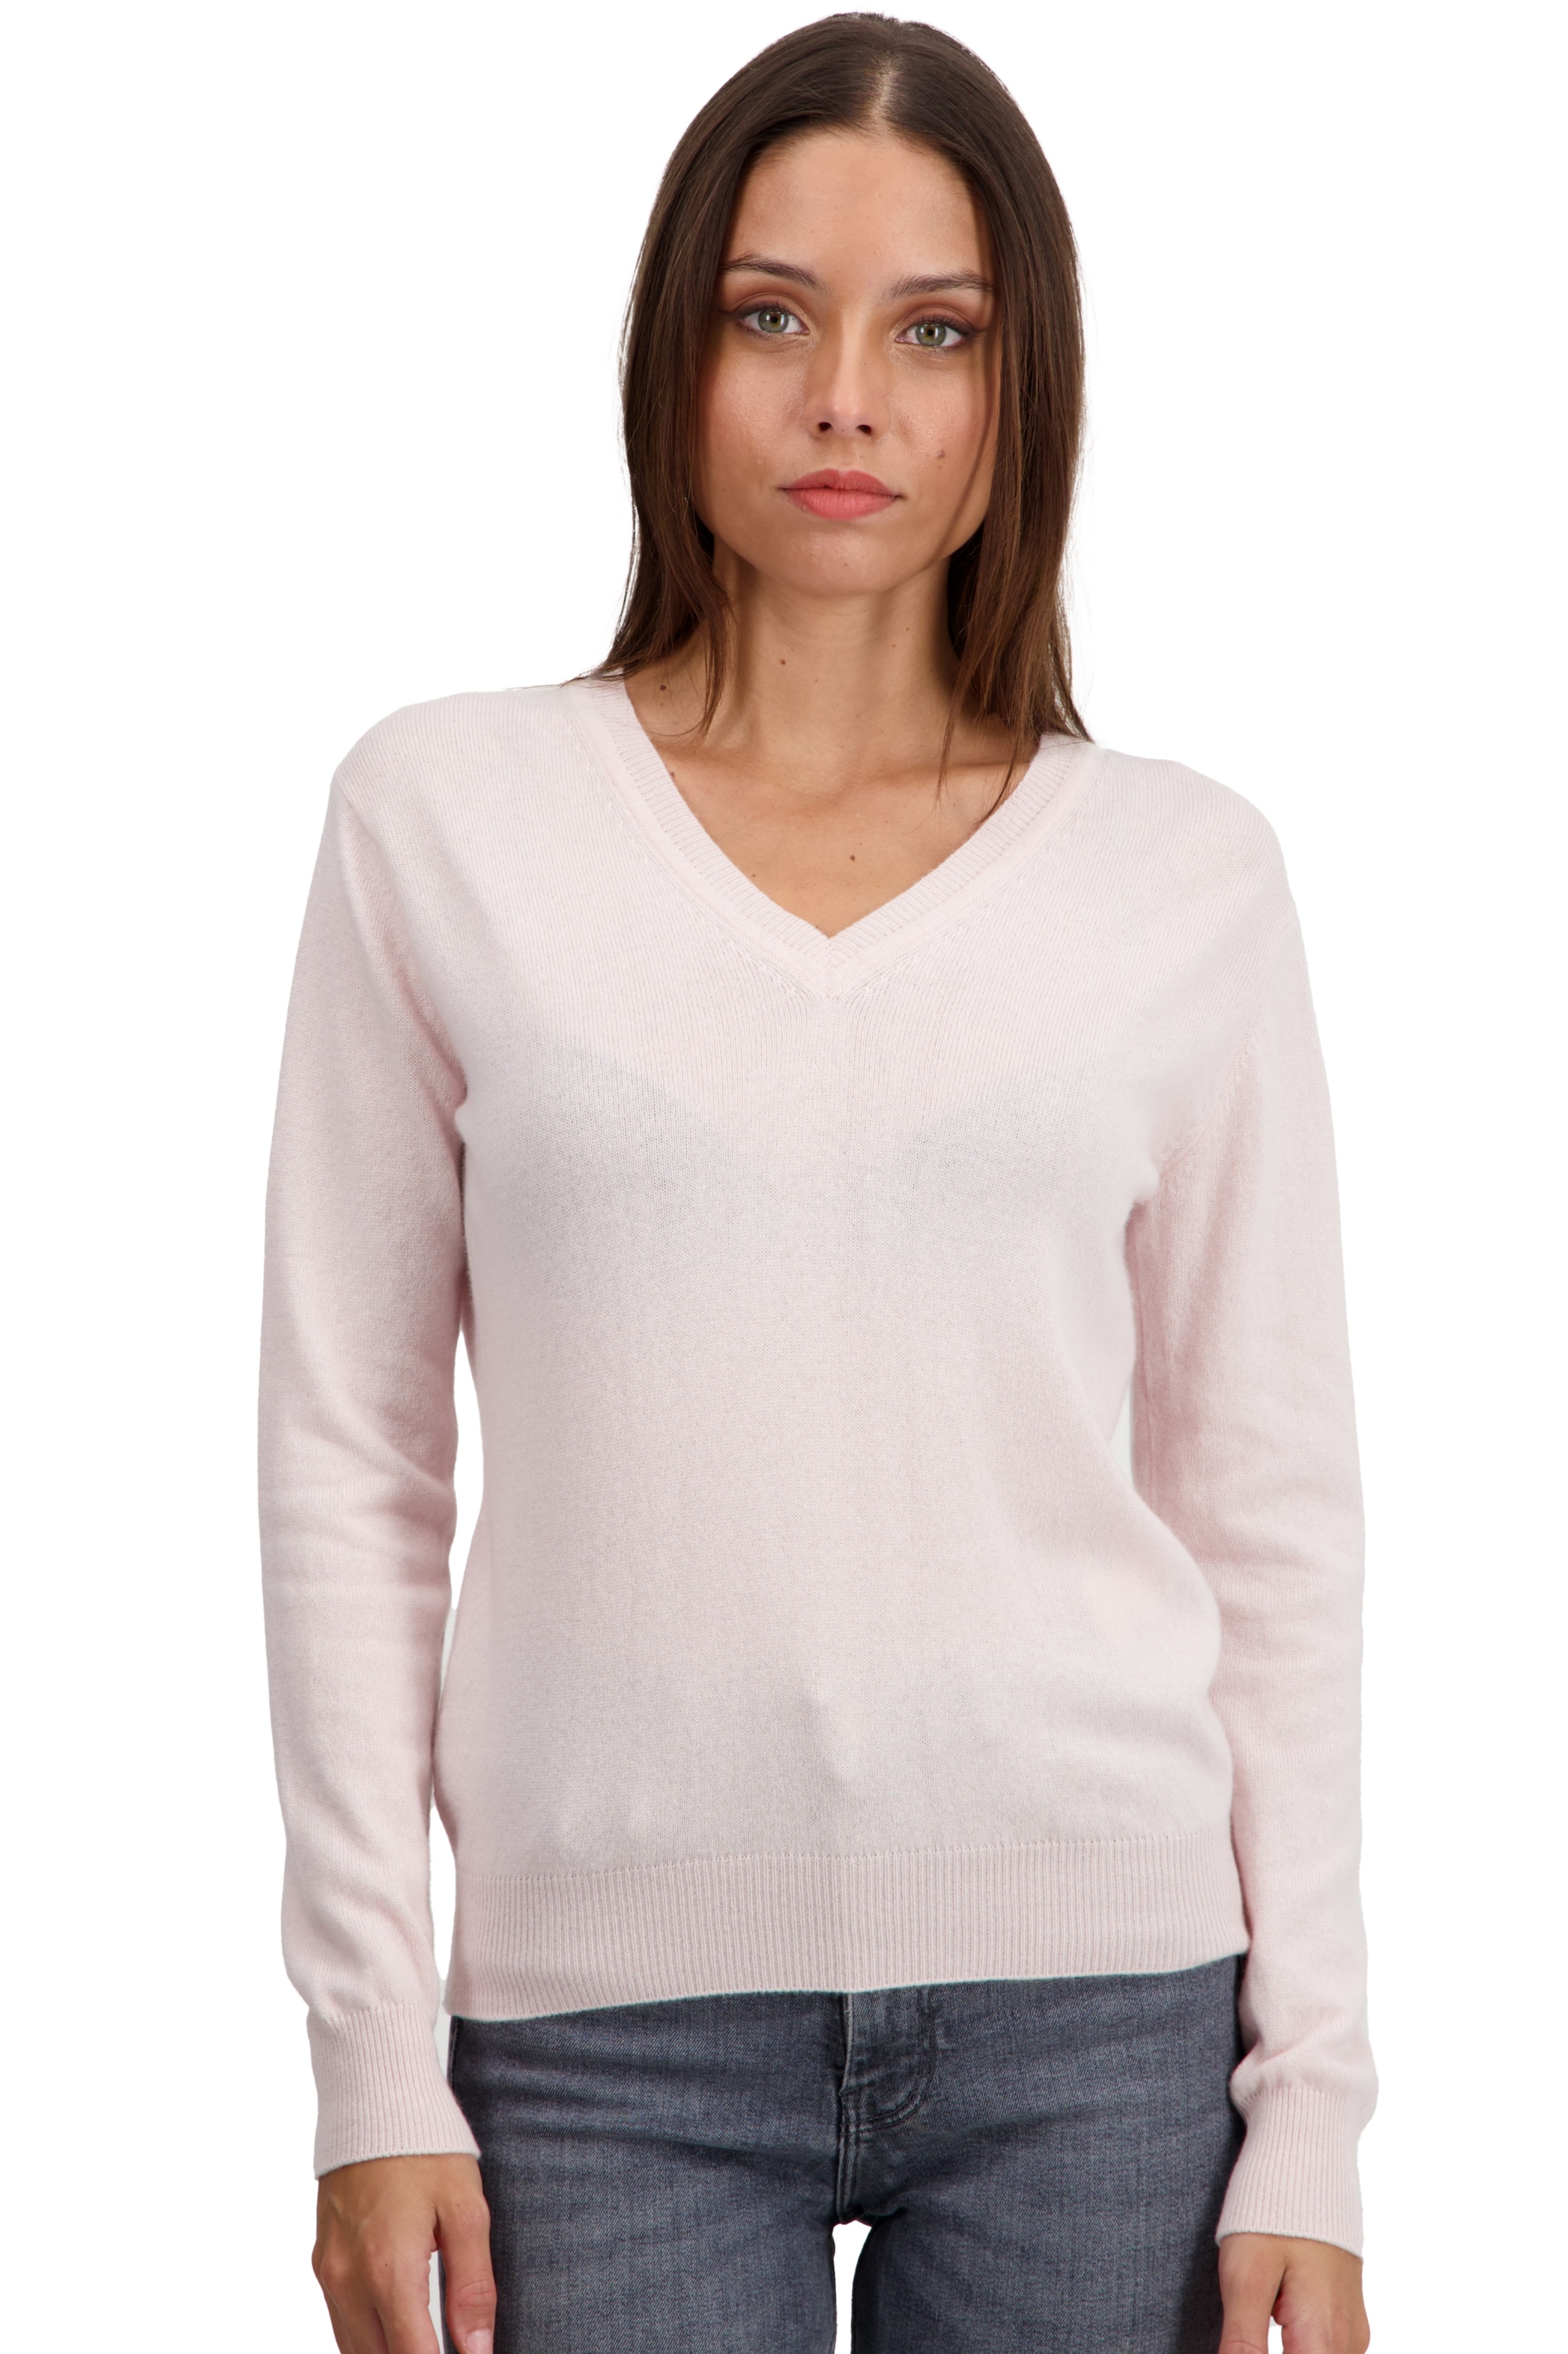 Cachemire pull femme faustine rose pale xl